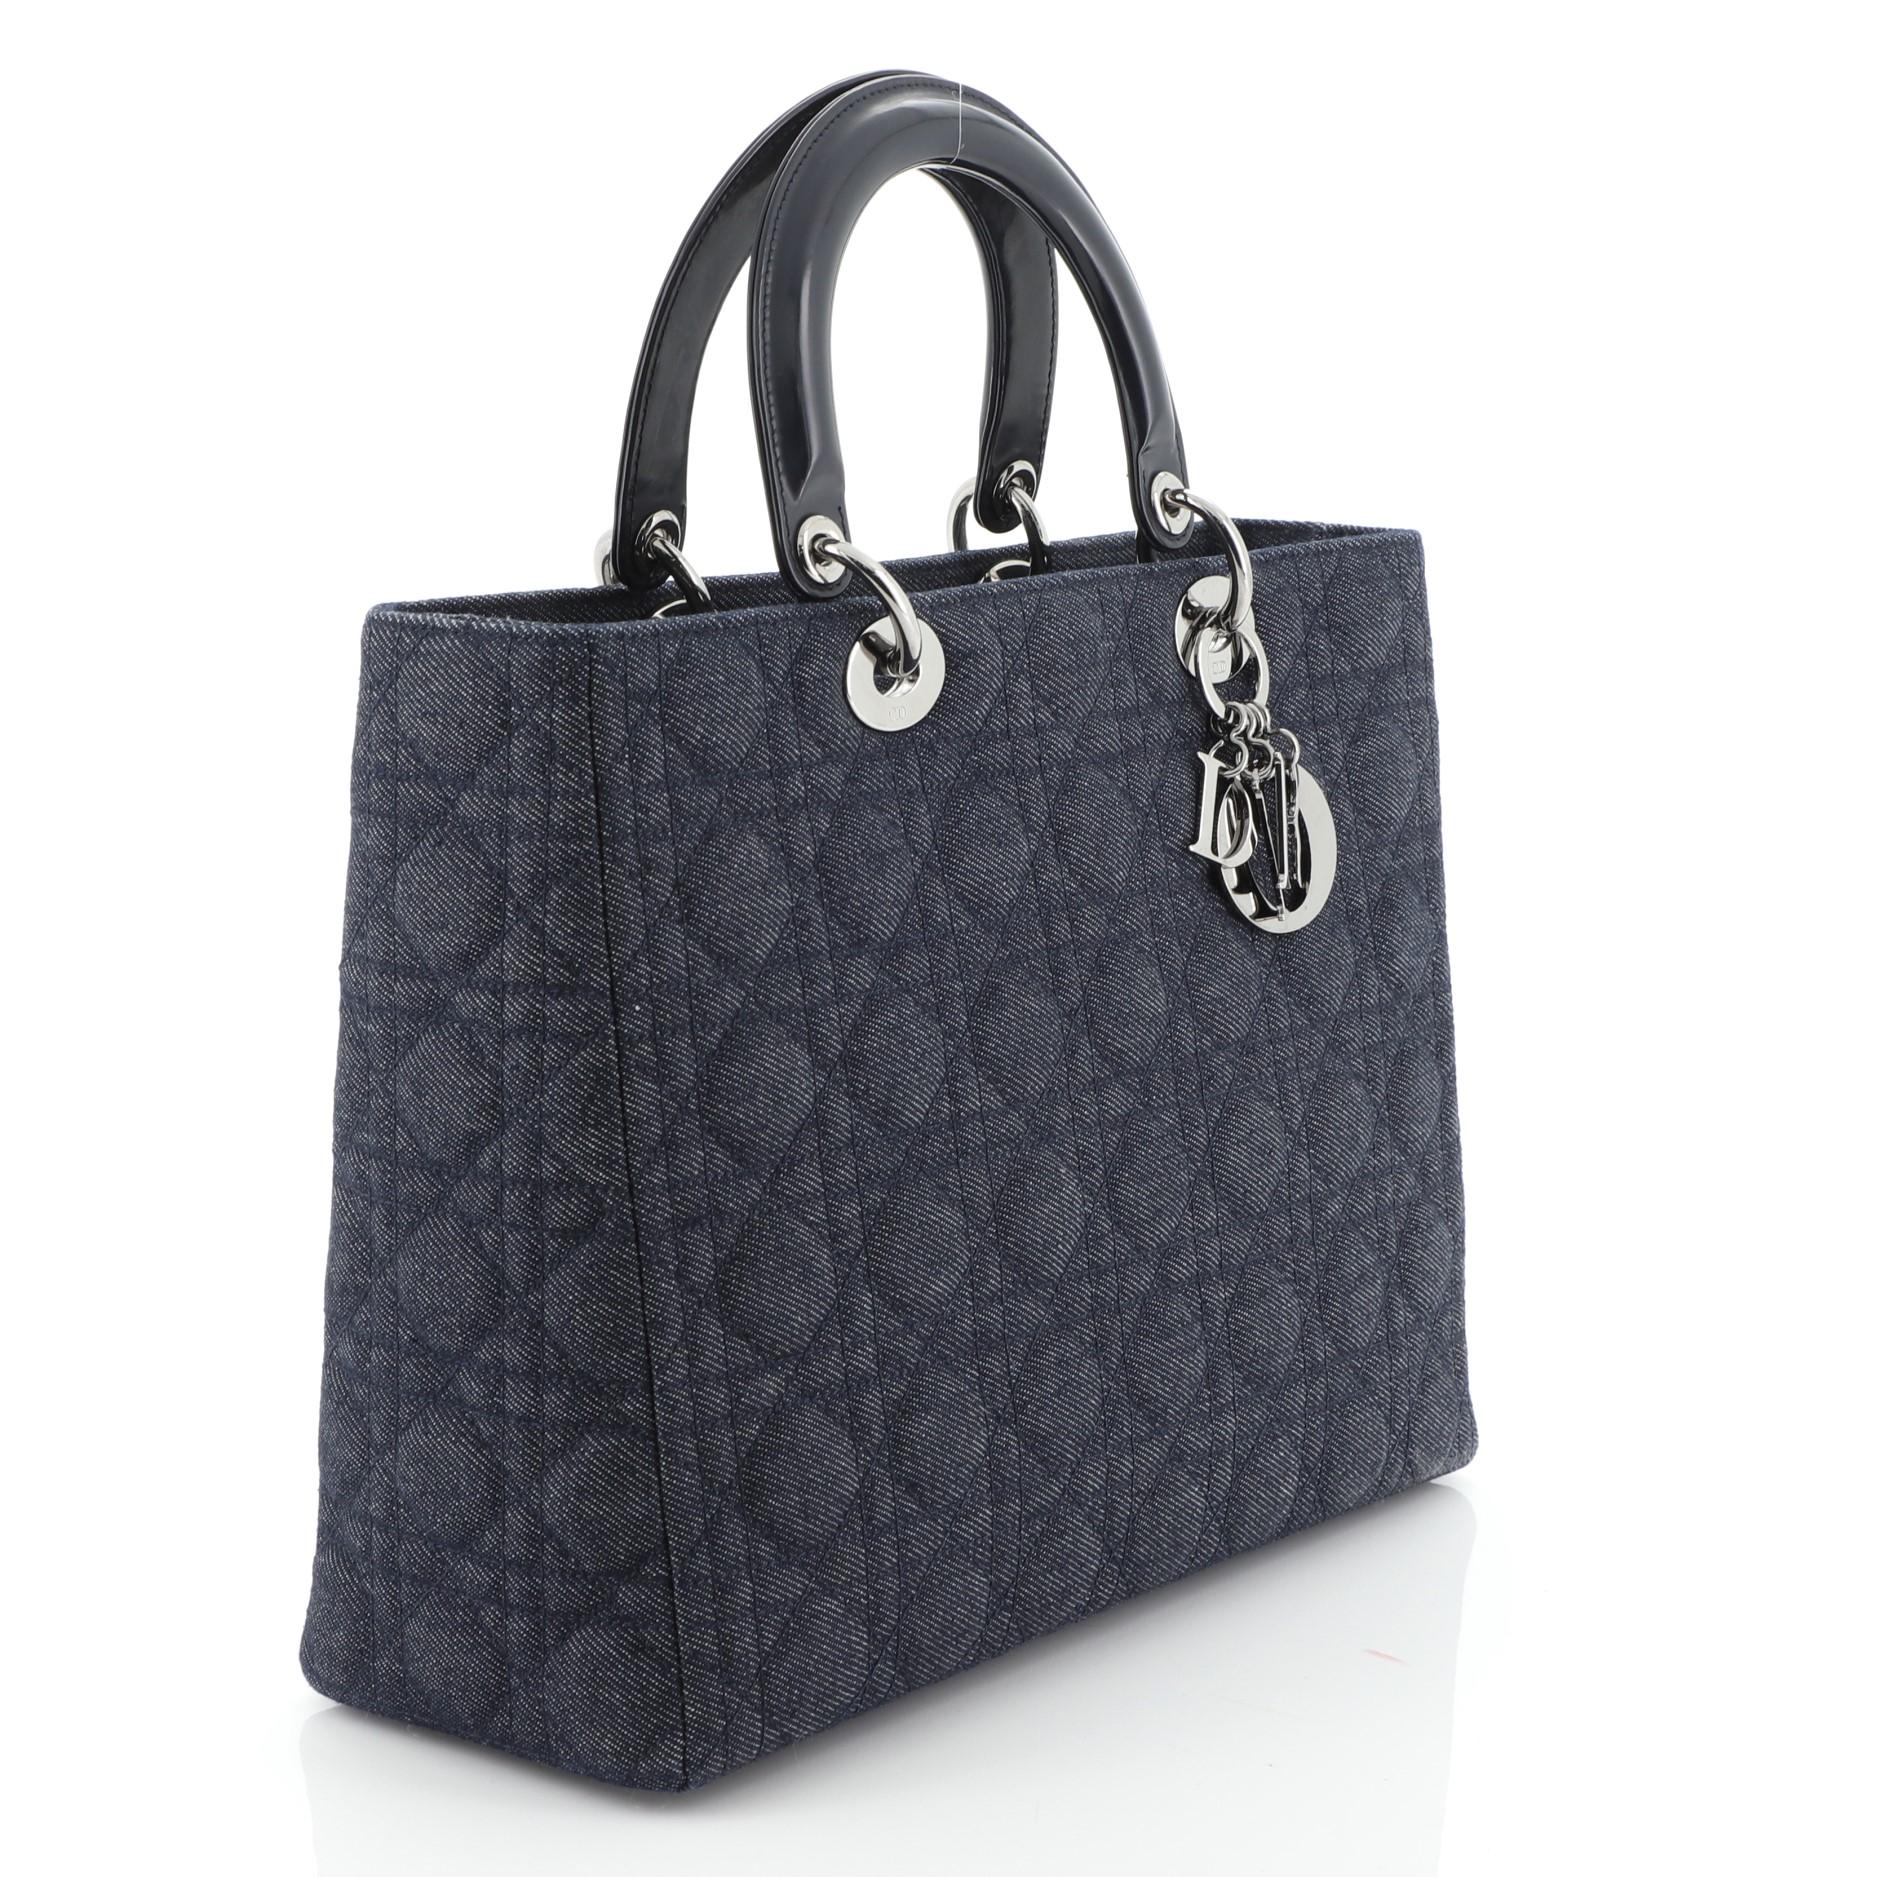 This Christian Dior Lady Dior Handbag Cannage Quilt Denim Large, crafted from blue denim, features short dual handles with sleek Dior charms, protective base studs, and gunmetal-tone hardware. Its top zipper closure opens to a blue fabric interior